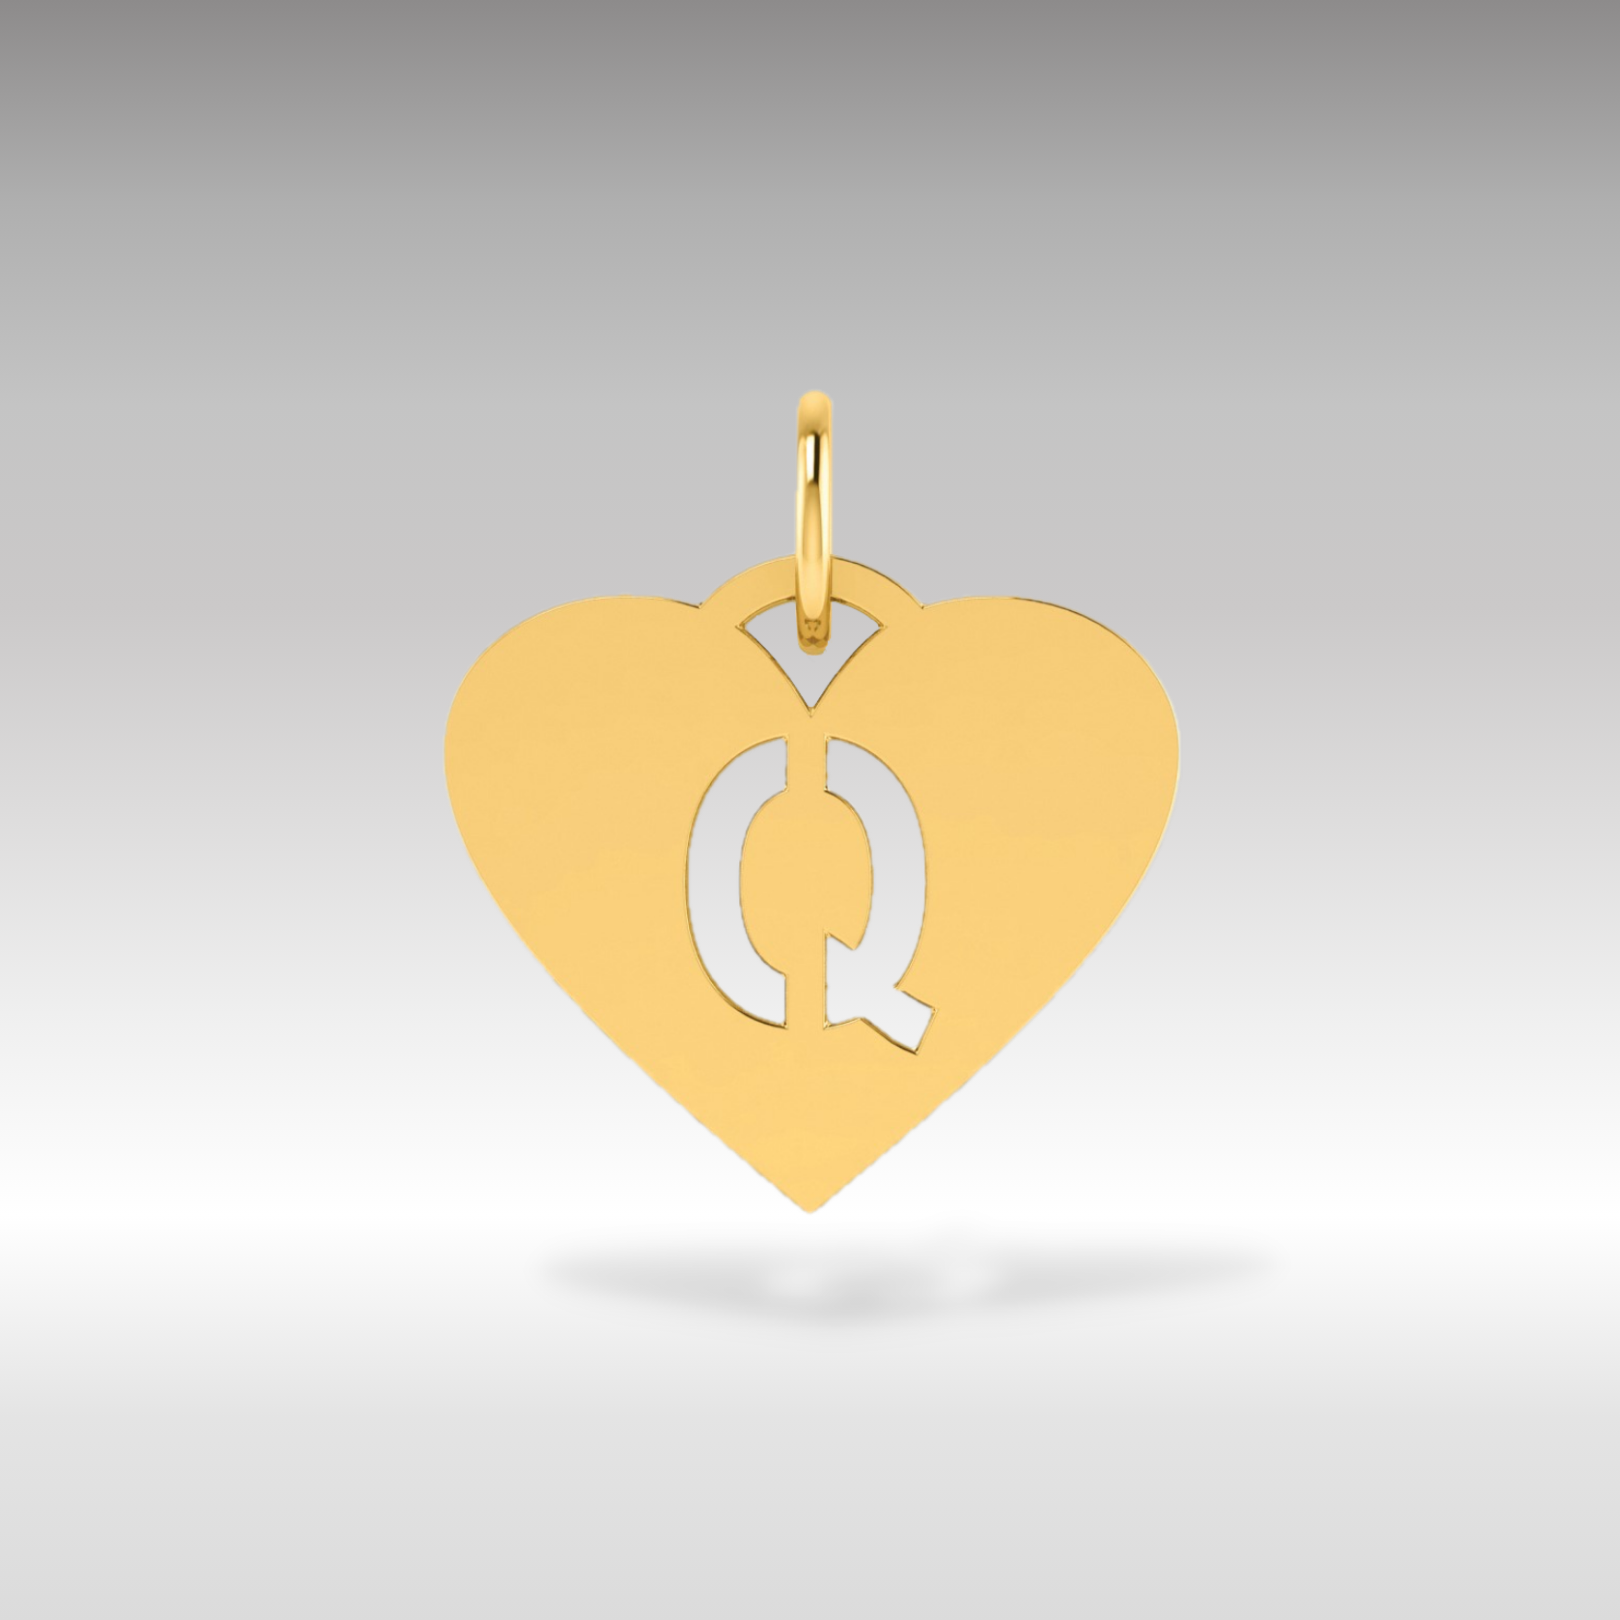 14K Gold Heart Pendant with Letter 'Q' - Charlie & Co. Jewelry